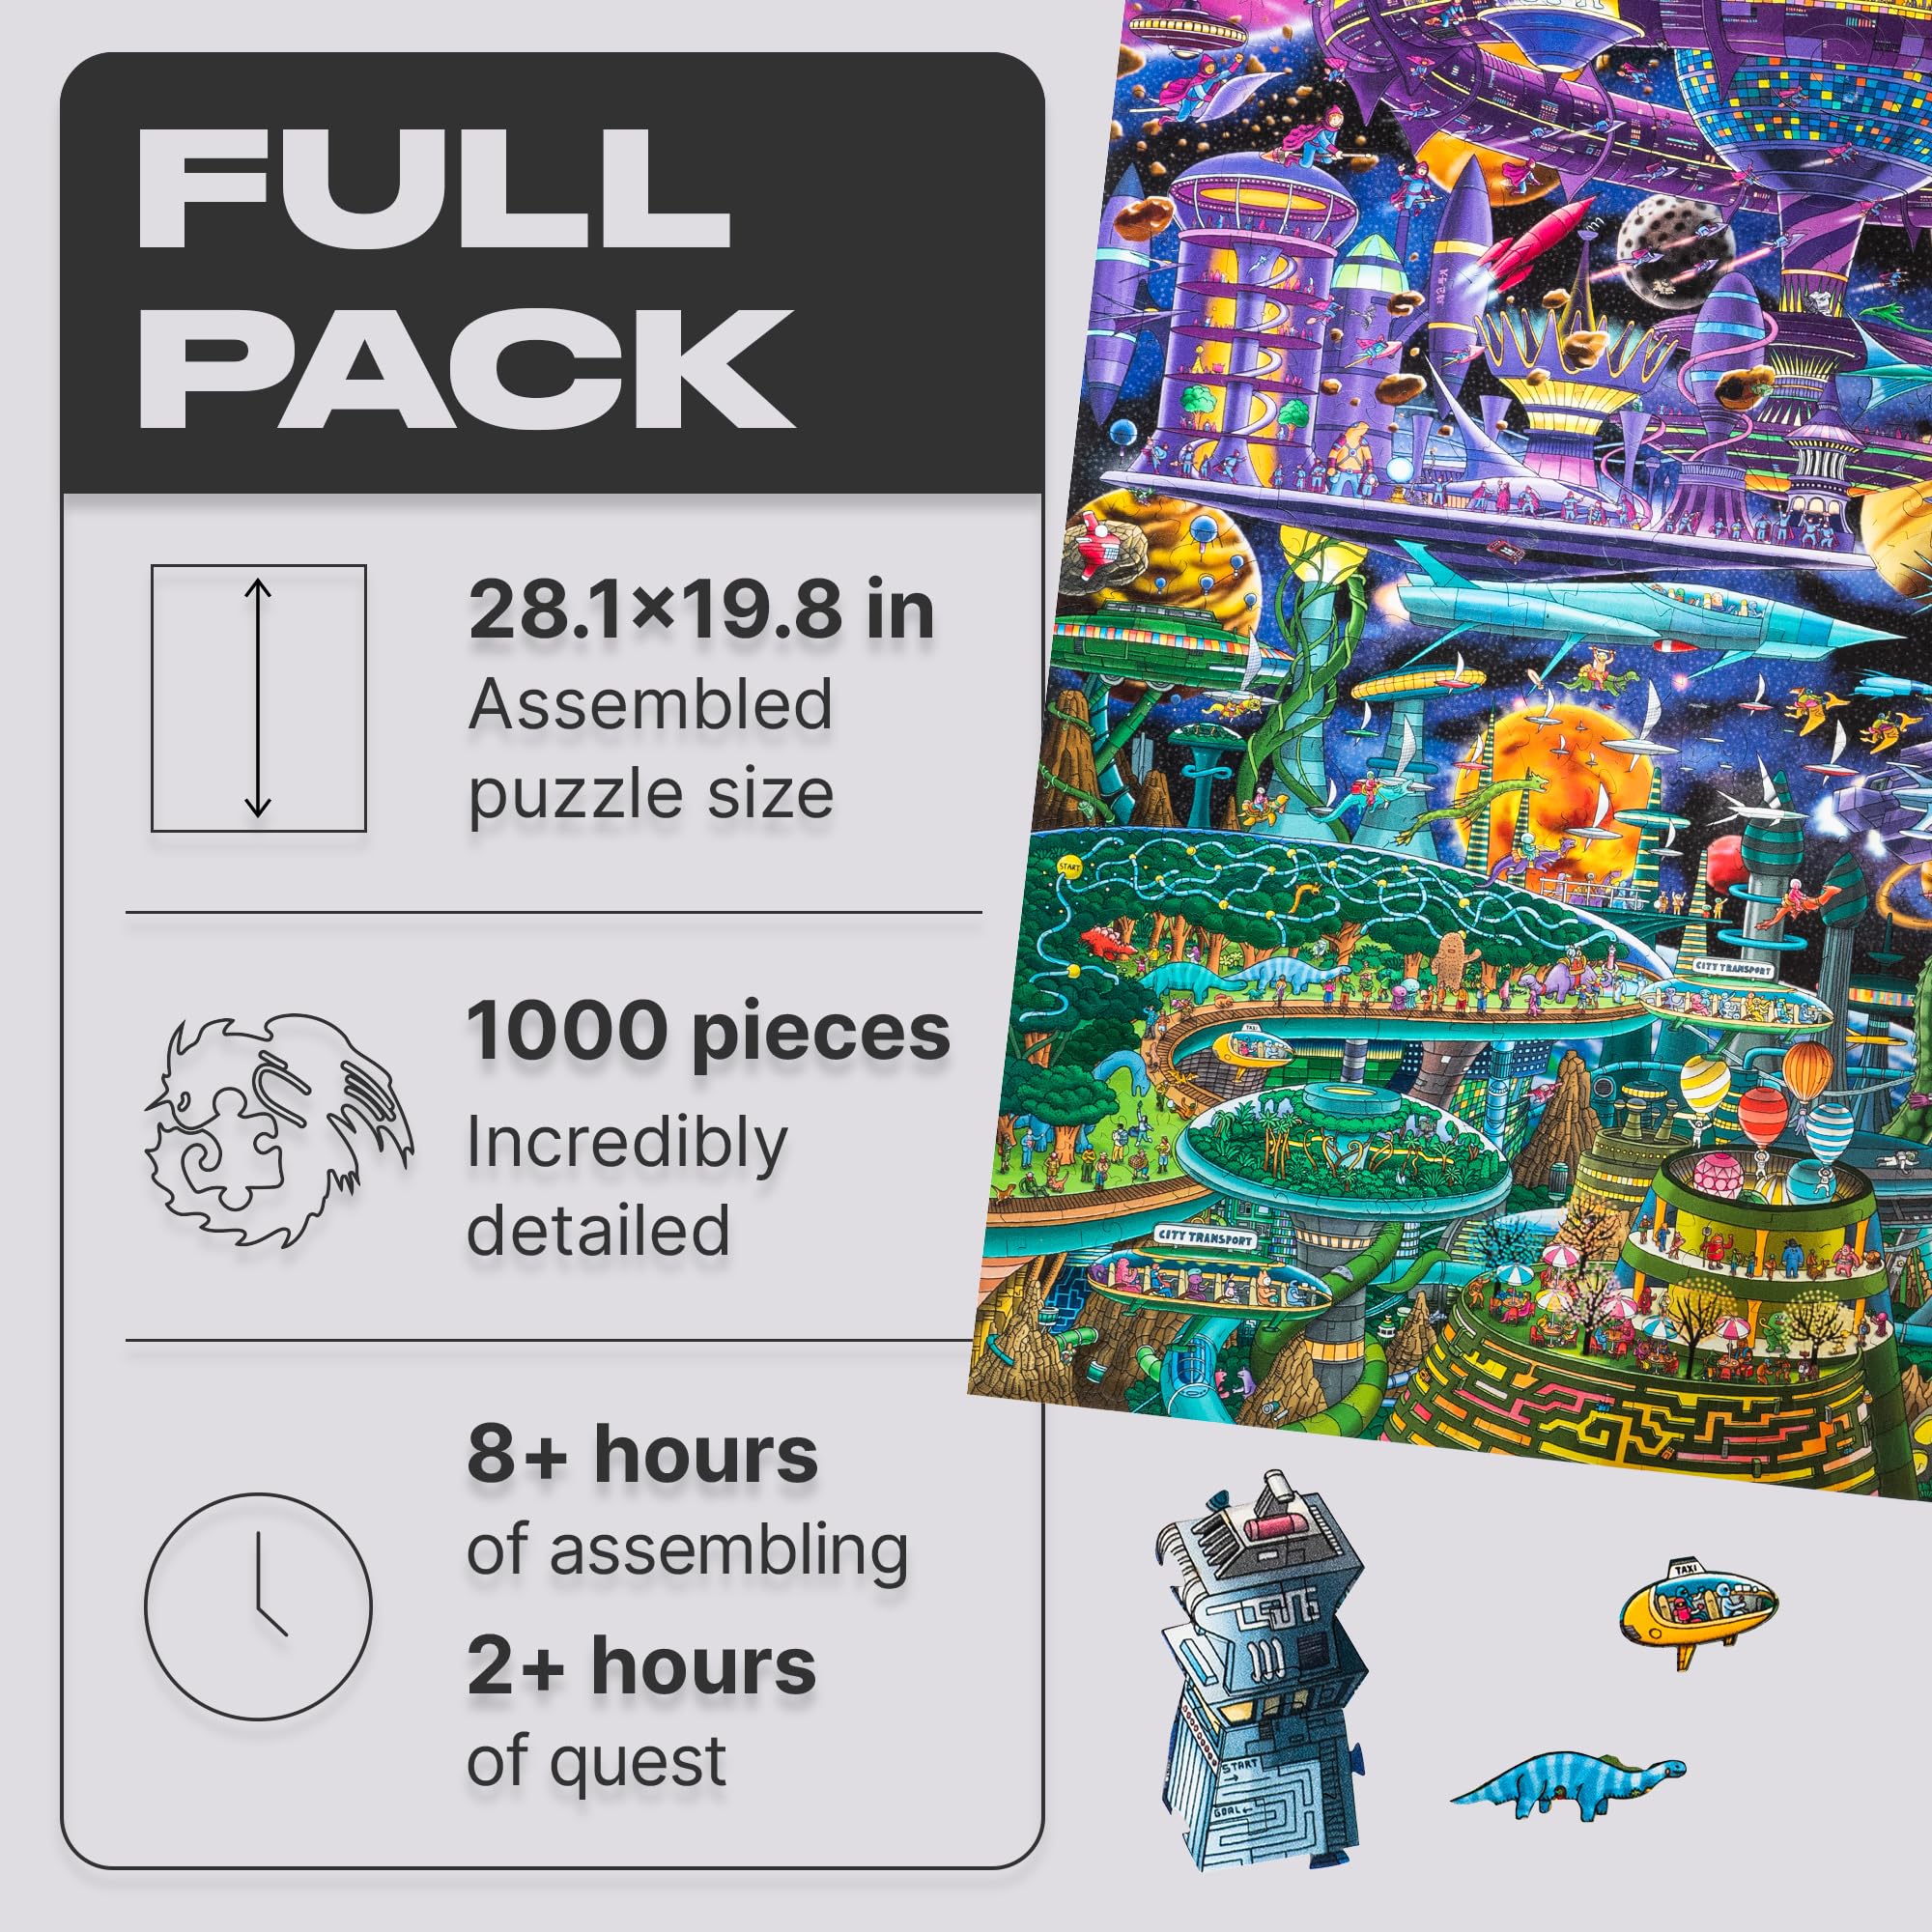 UNIDRAGON Original + IC4 Design Wooden Puzzle Jigsaw, Puzzle Board Game, Quezzle Space Adventures, Full Pack, 1000 Pieces, 28.1 by 19.8 inches